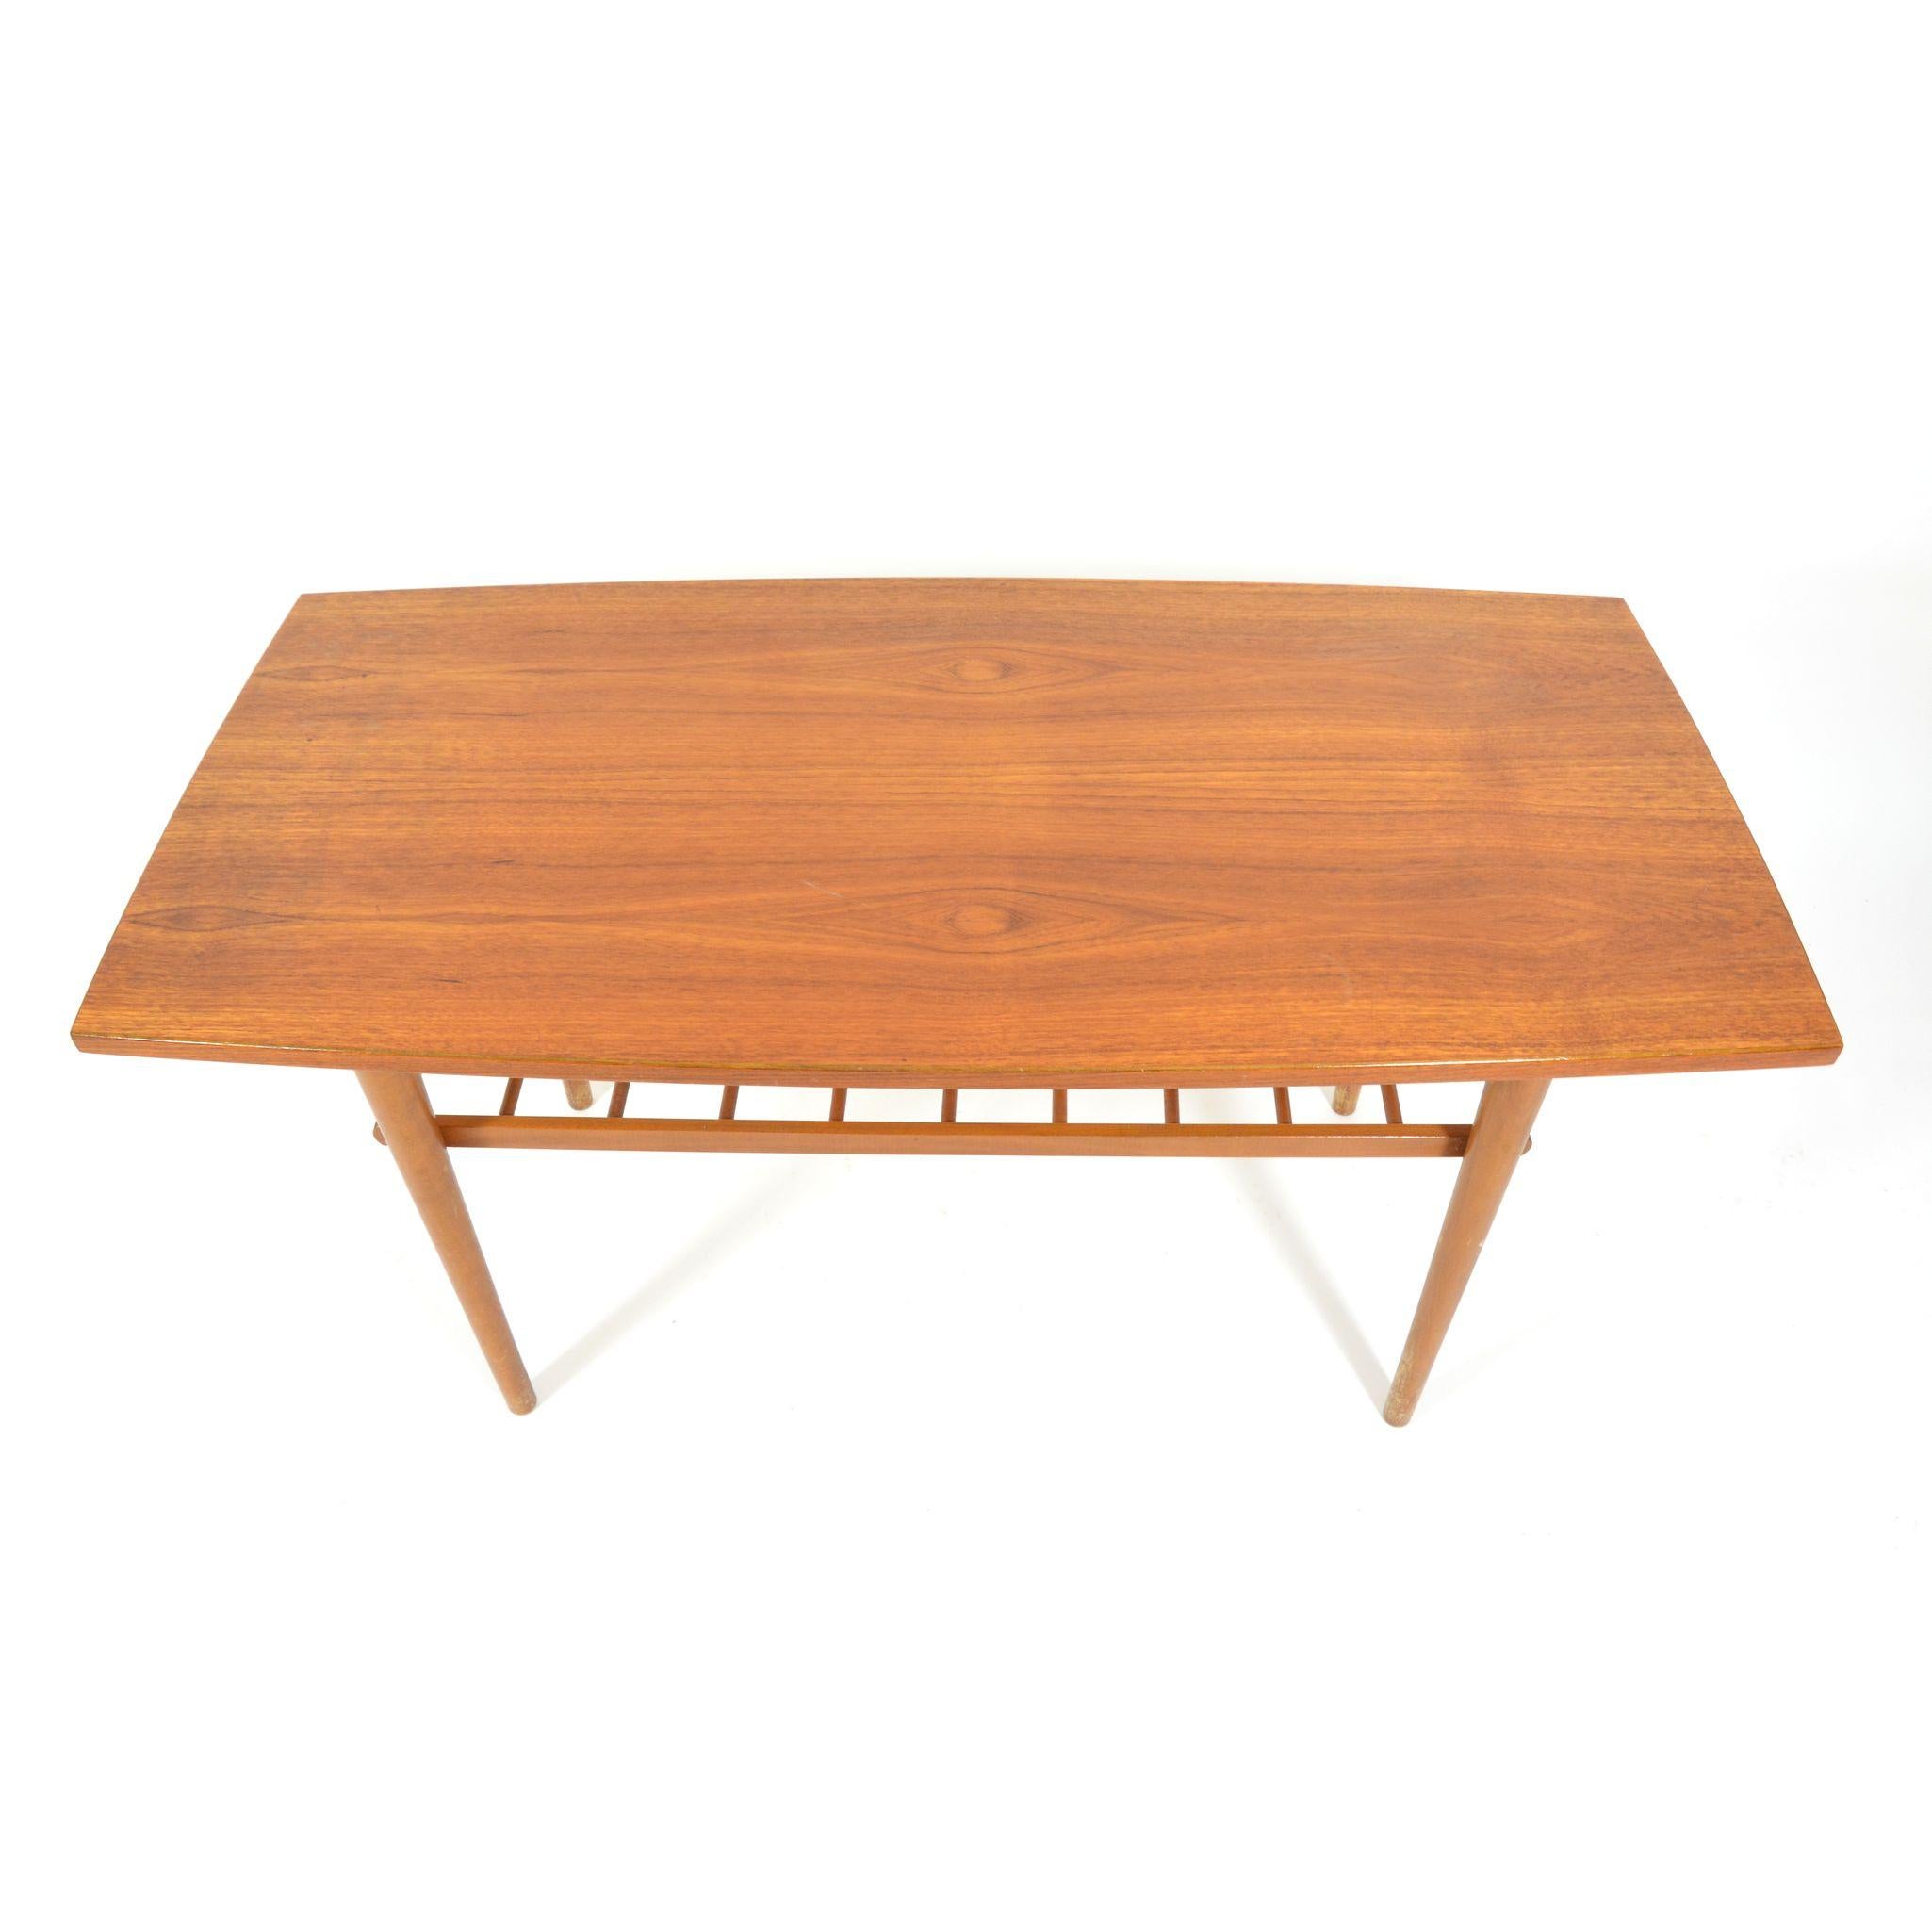 Veneered coffee table by Krásná Jizba, ÚLUV, manufactured in former Czechoslovakia during 1970s. Table is in very good condition only with small signs of use, it has minor instability.